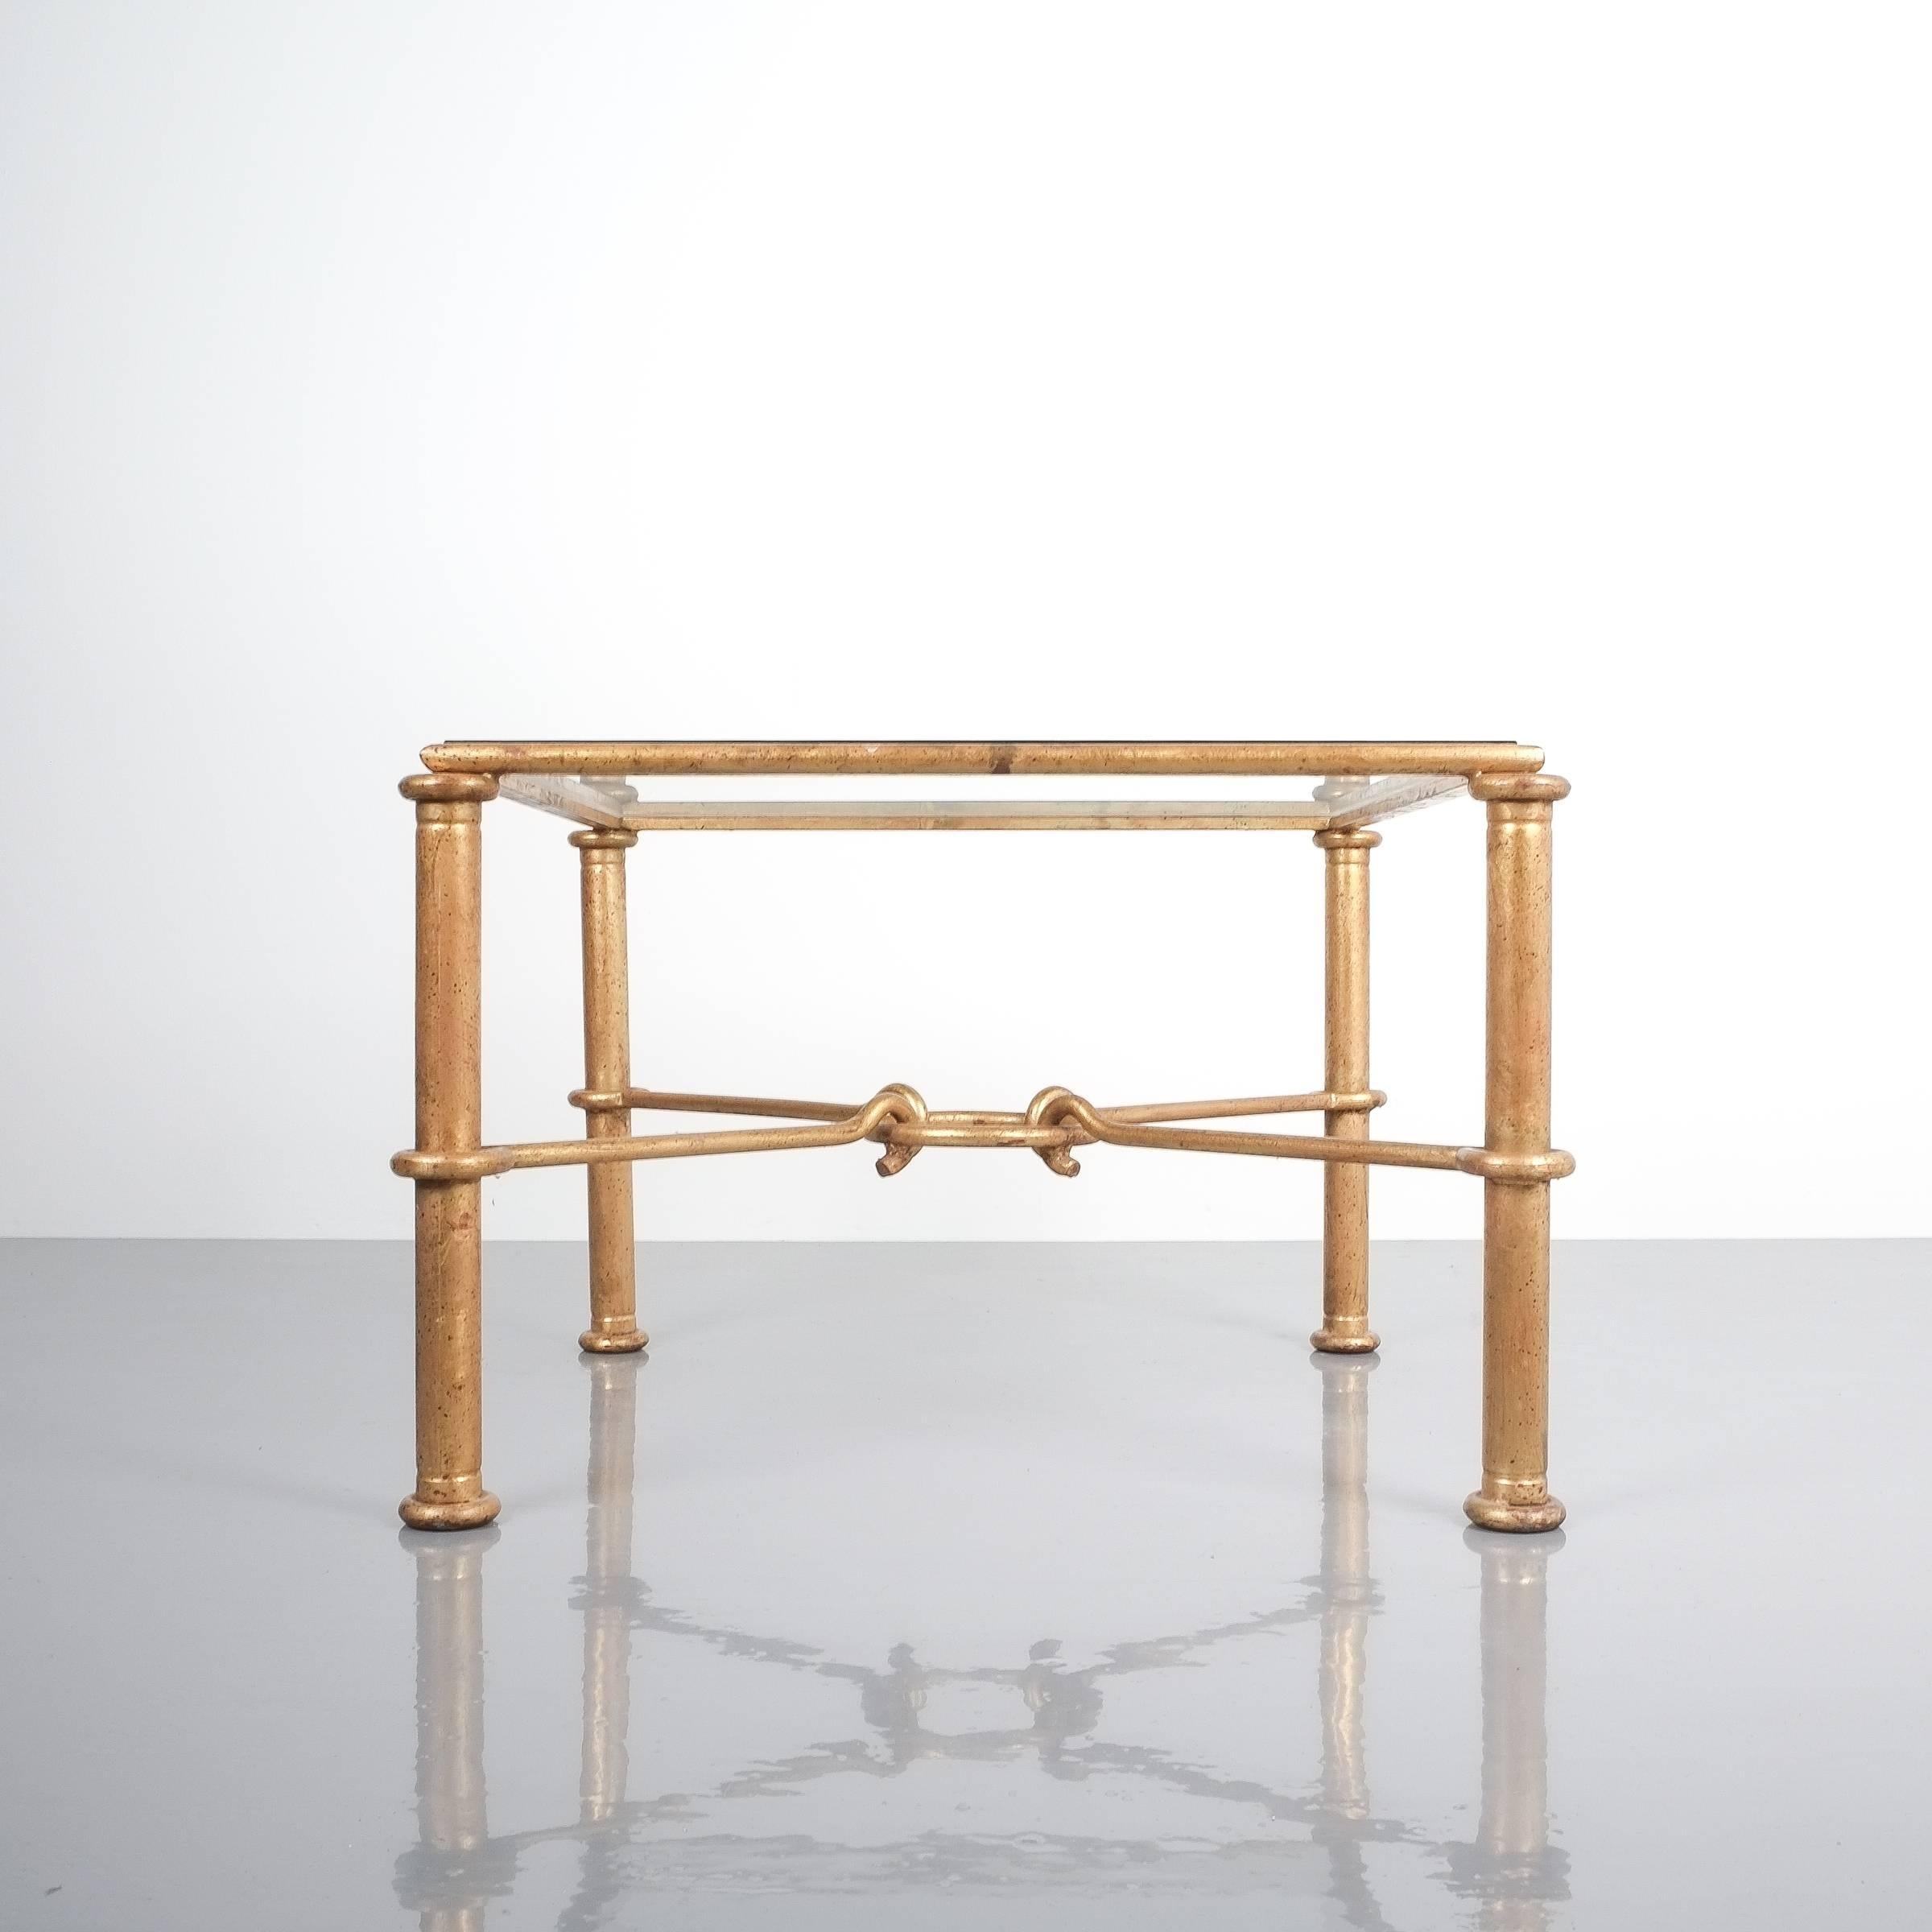 French Rene Drouet Attributed Pair of Gilt Iron Side Tables, France, 1950